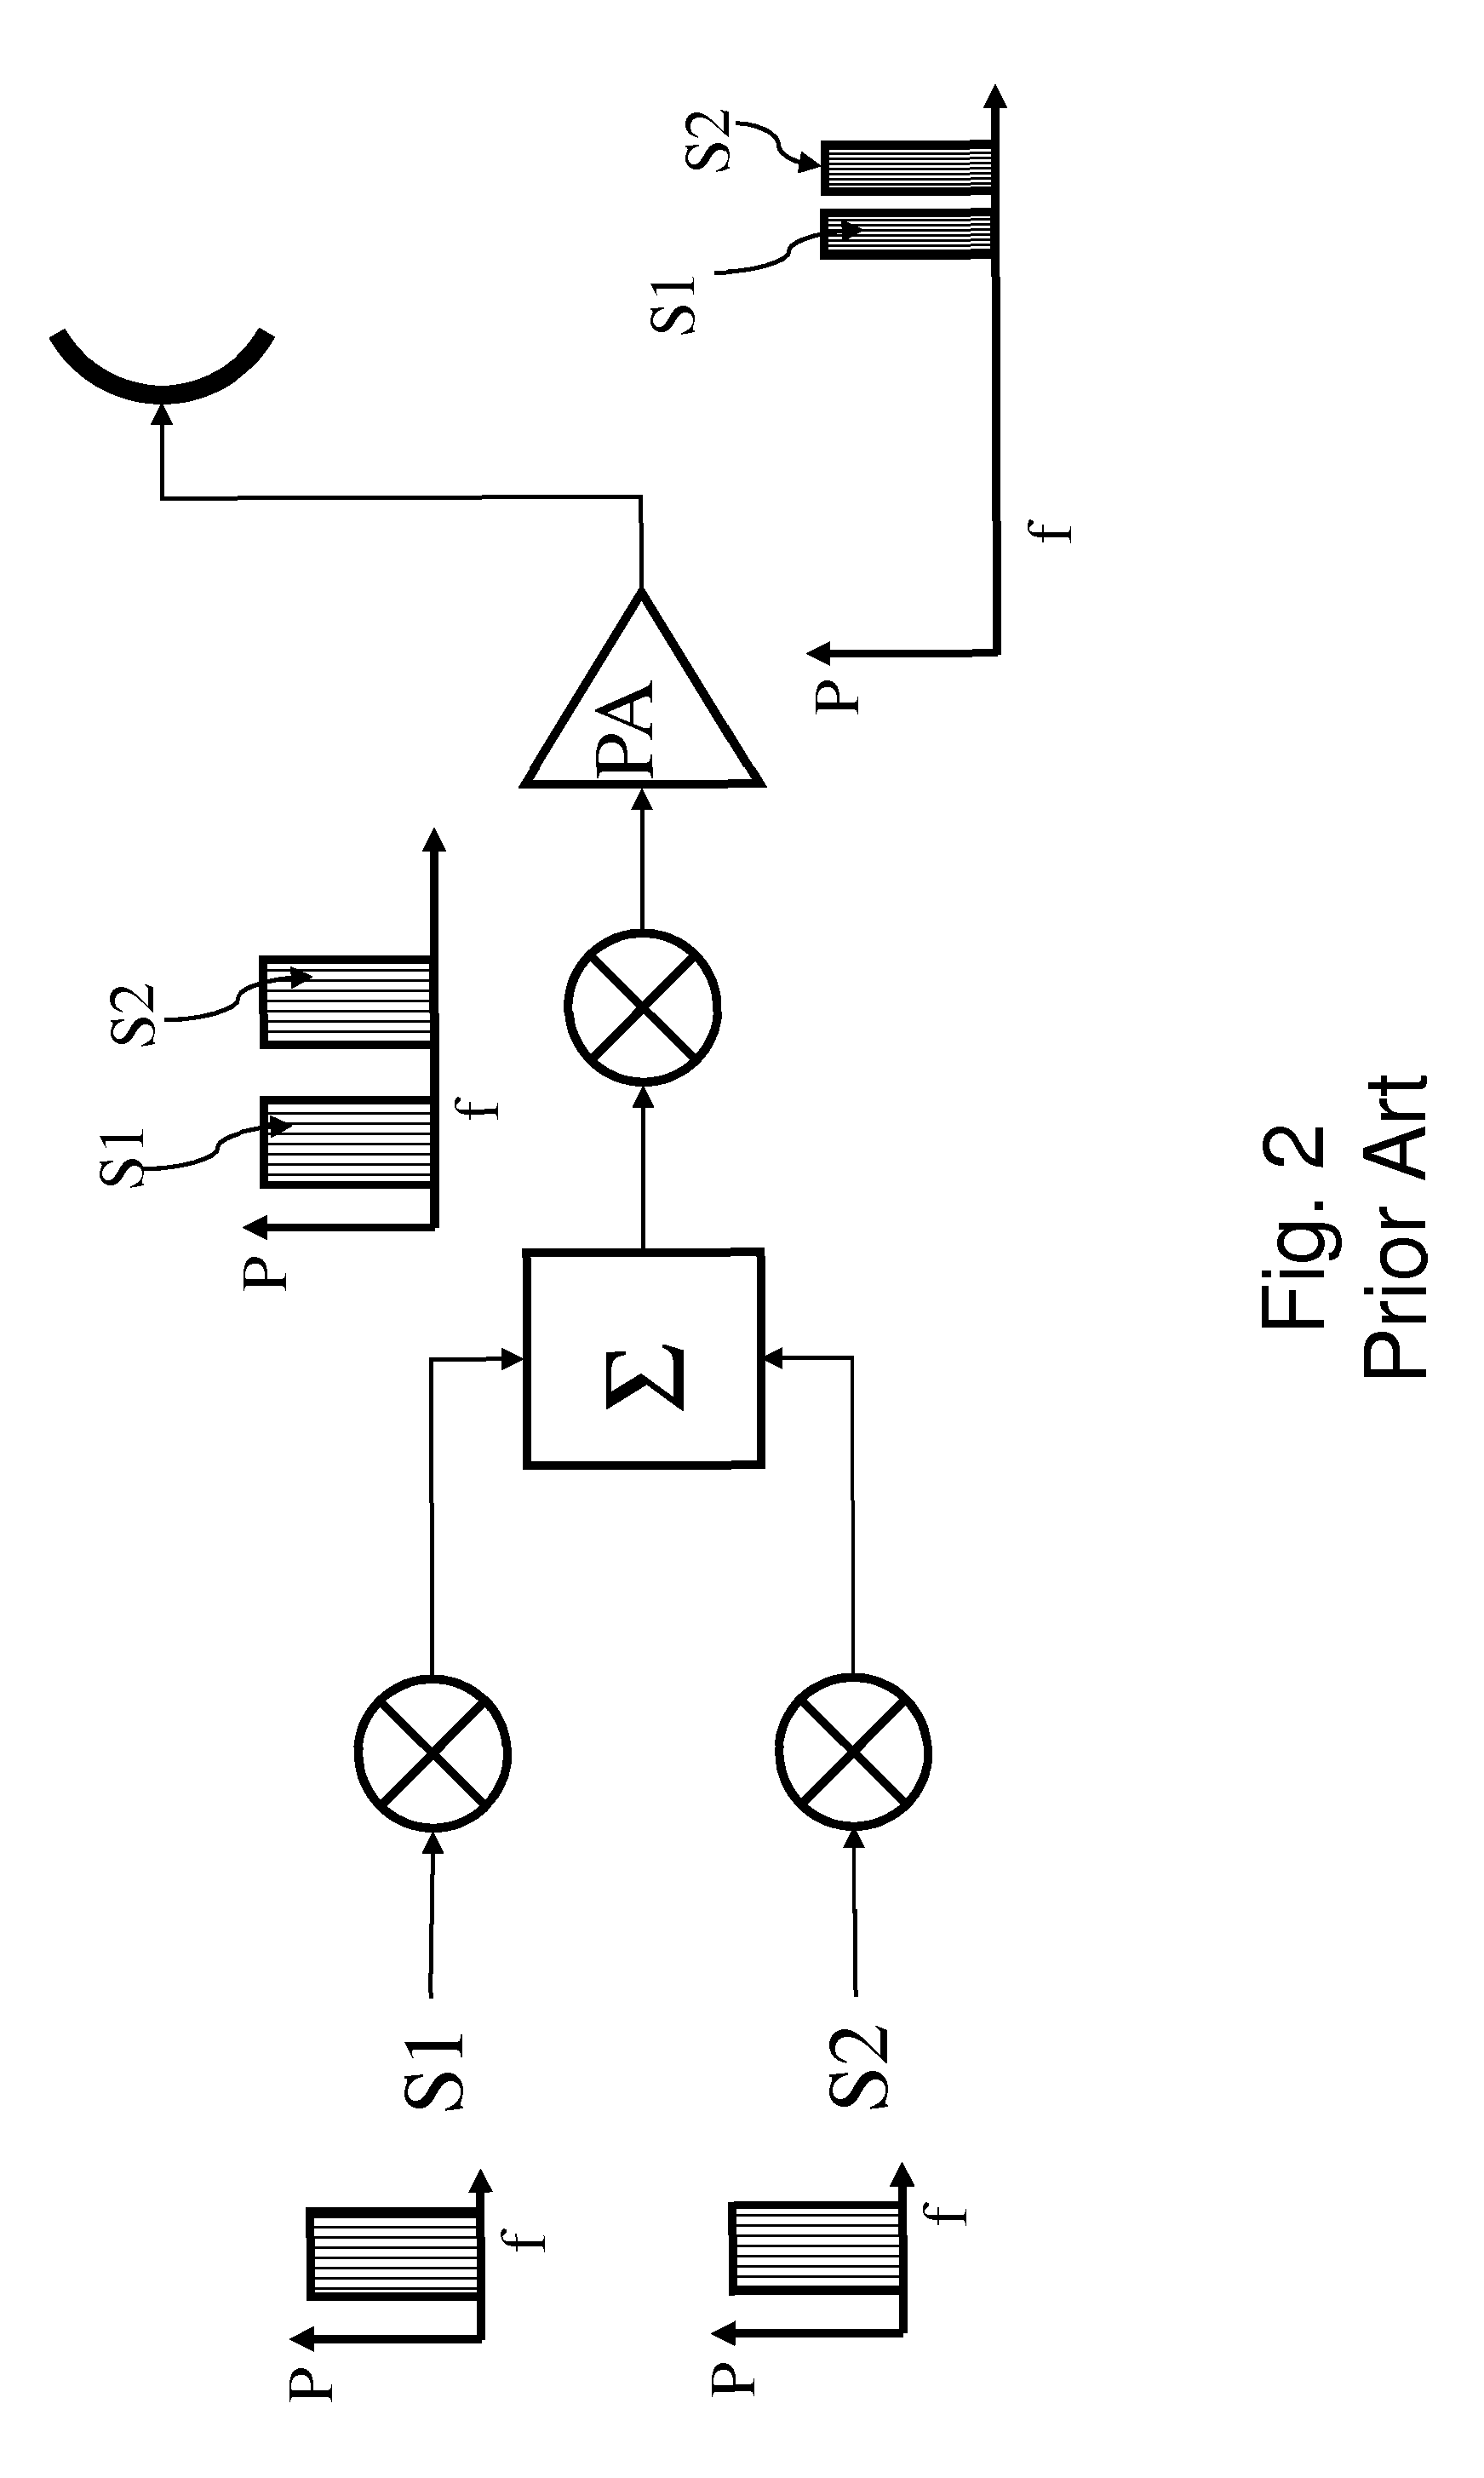 System and method for controlling combined radio signals